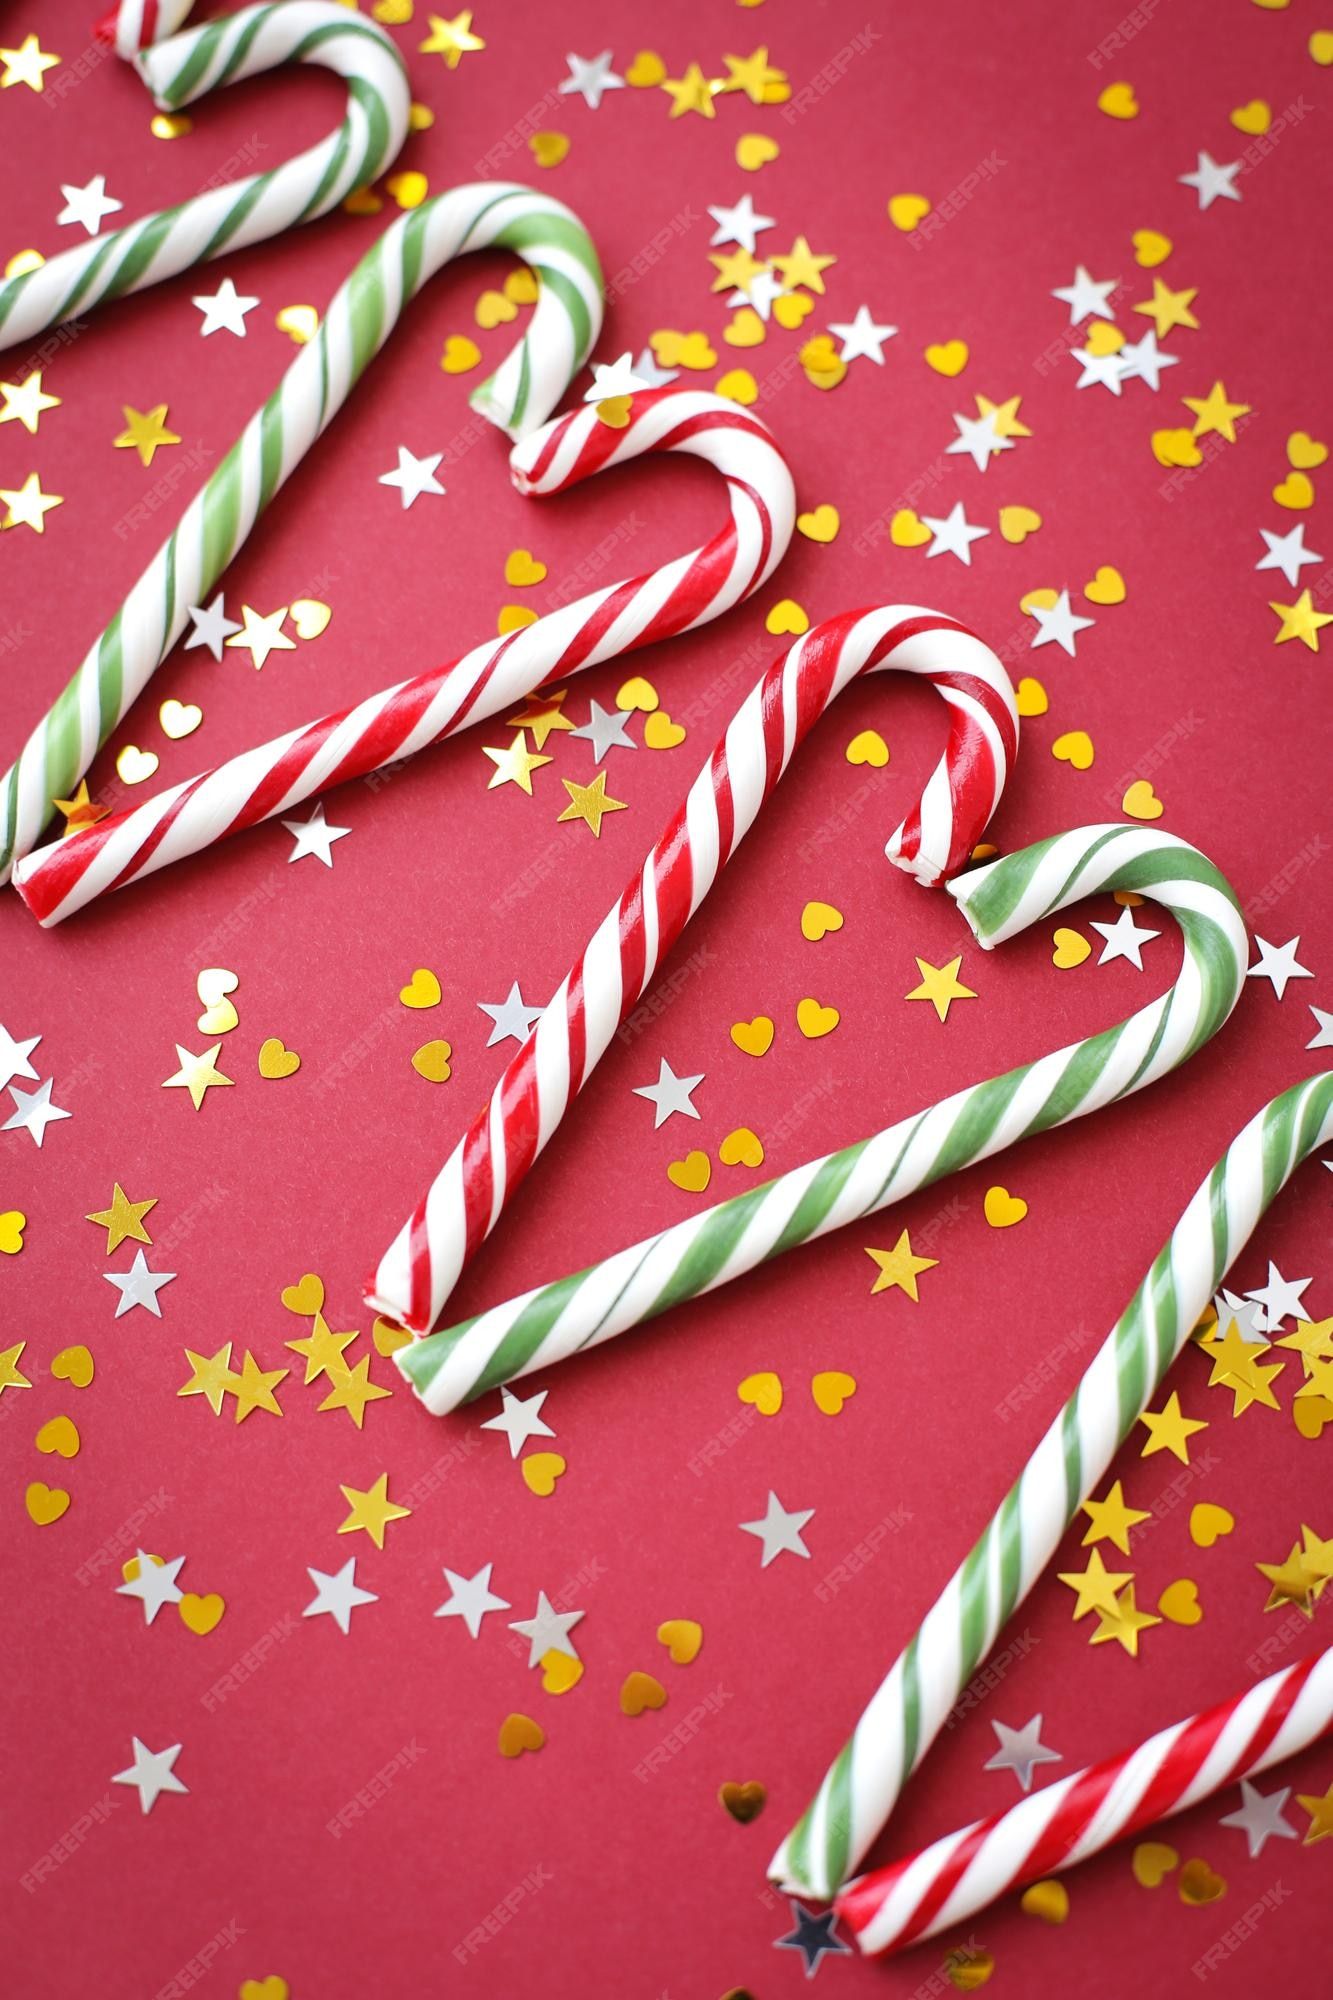 Premium Photo. Delicious whole christmas candy canes on a bright fullscreen background